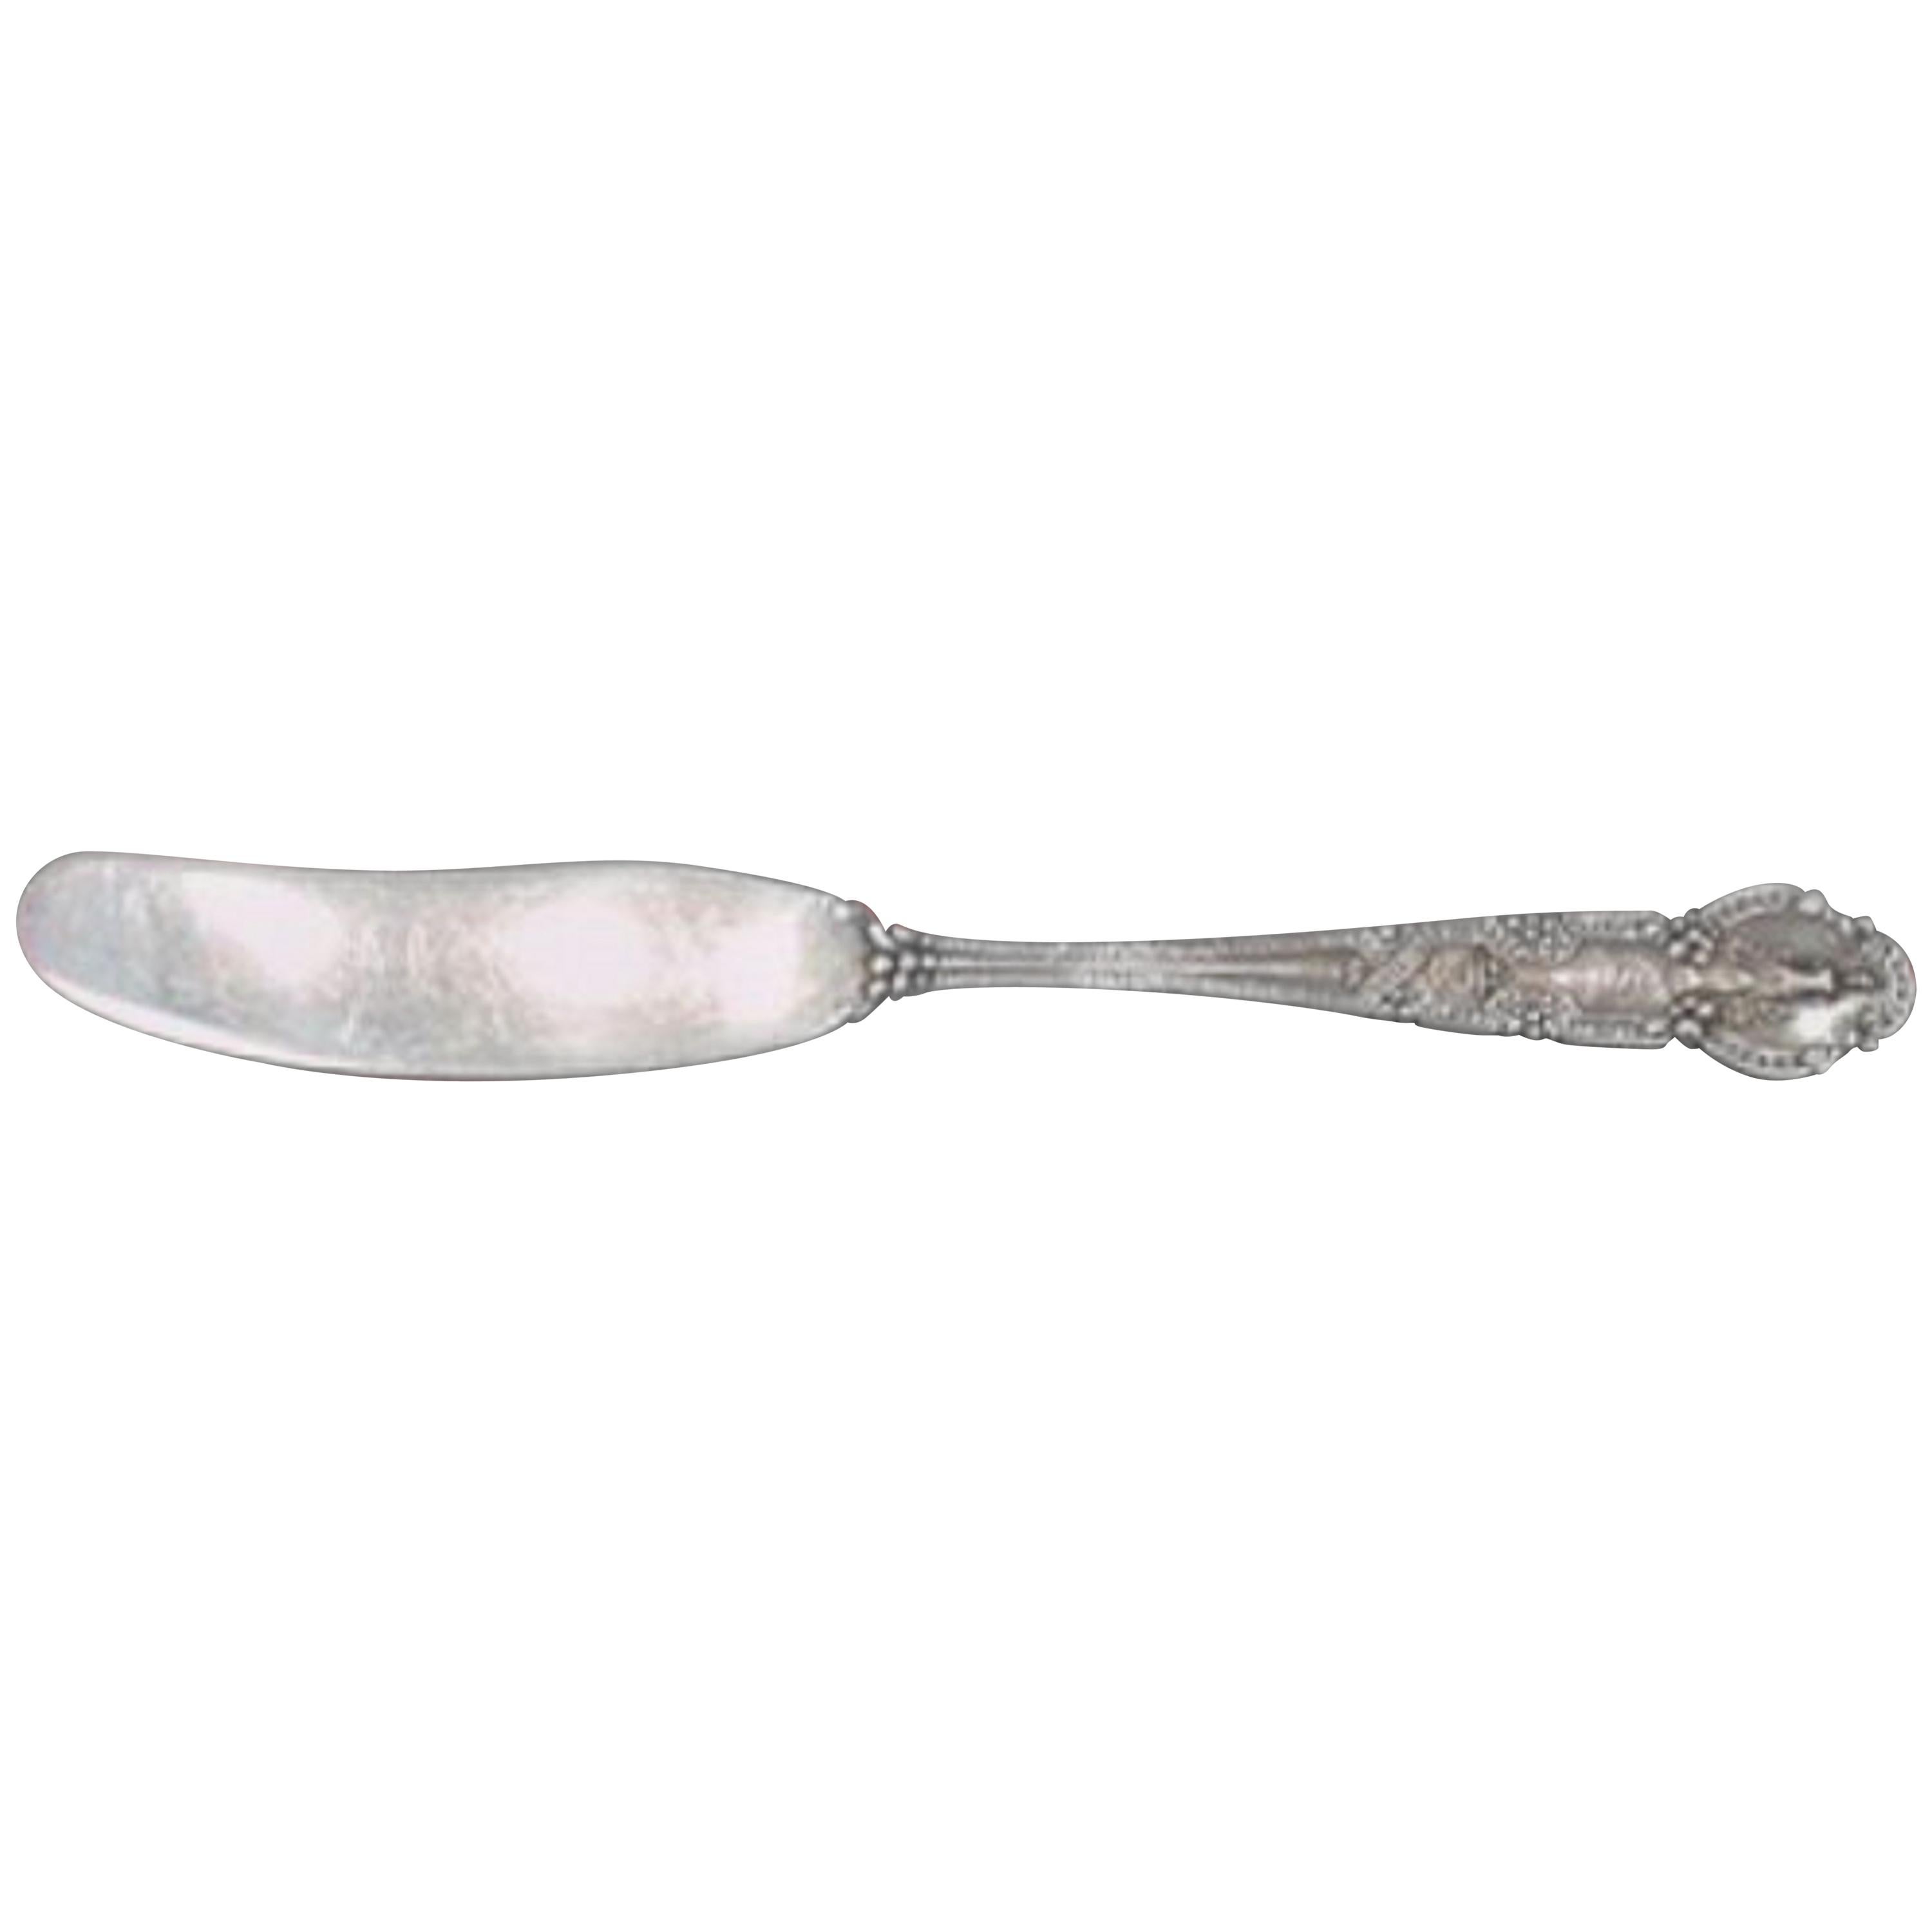 Renaissance by Tiffany & Co. Sterling Silver Butter Spreader Flat Figural